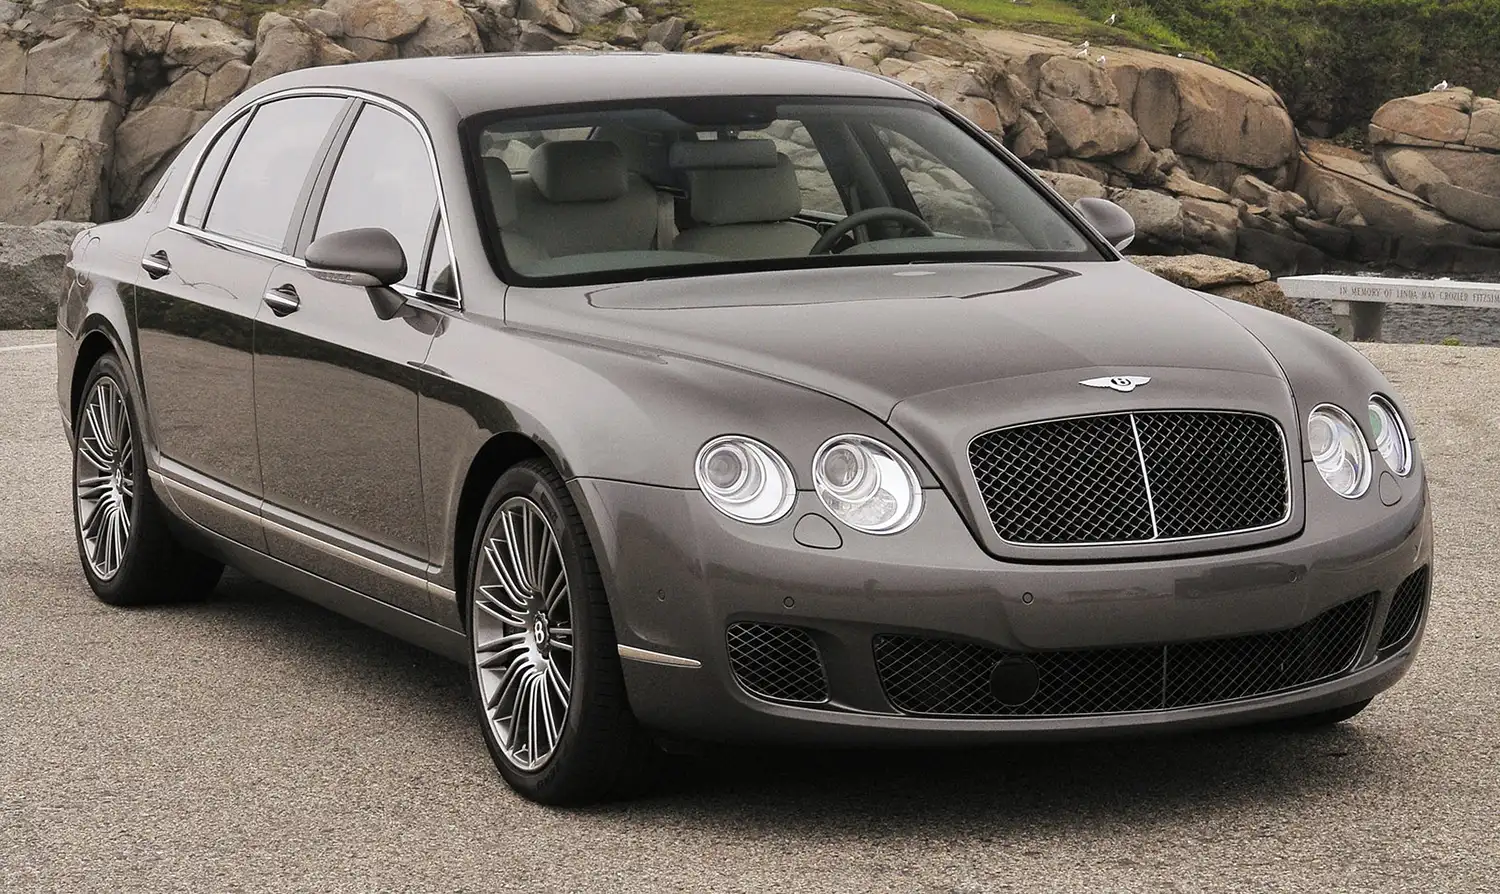 2009 Bentley Flying Spur Speed: Power and Luxury